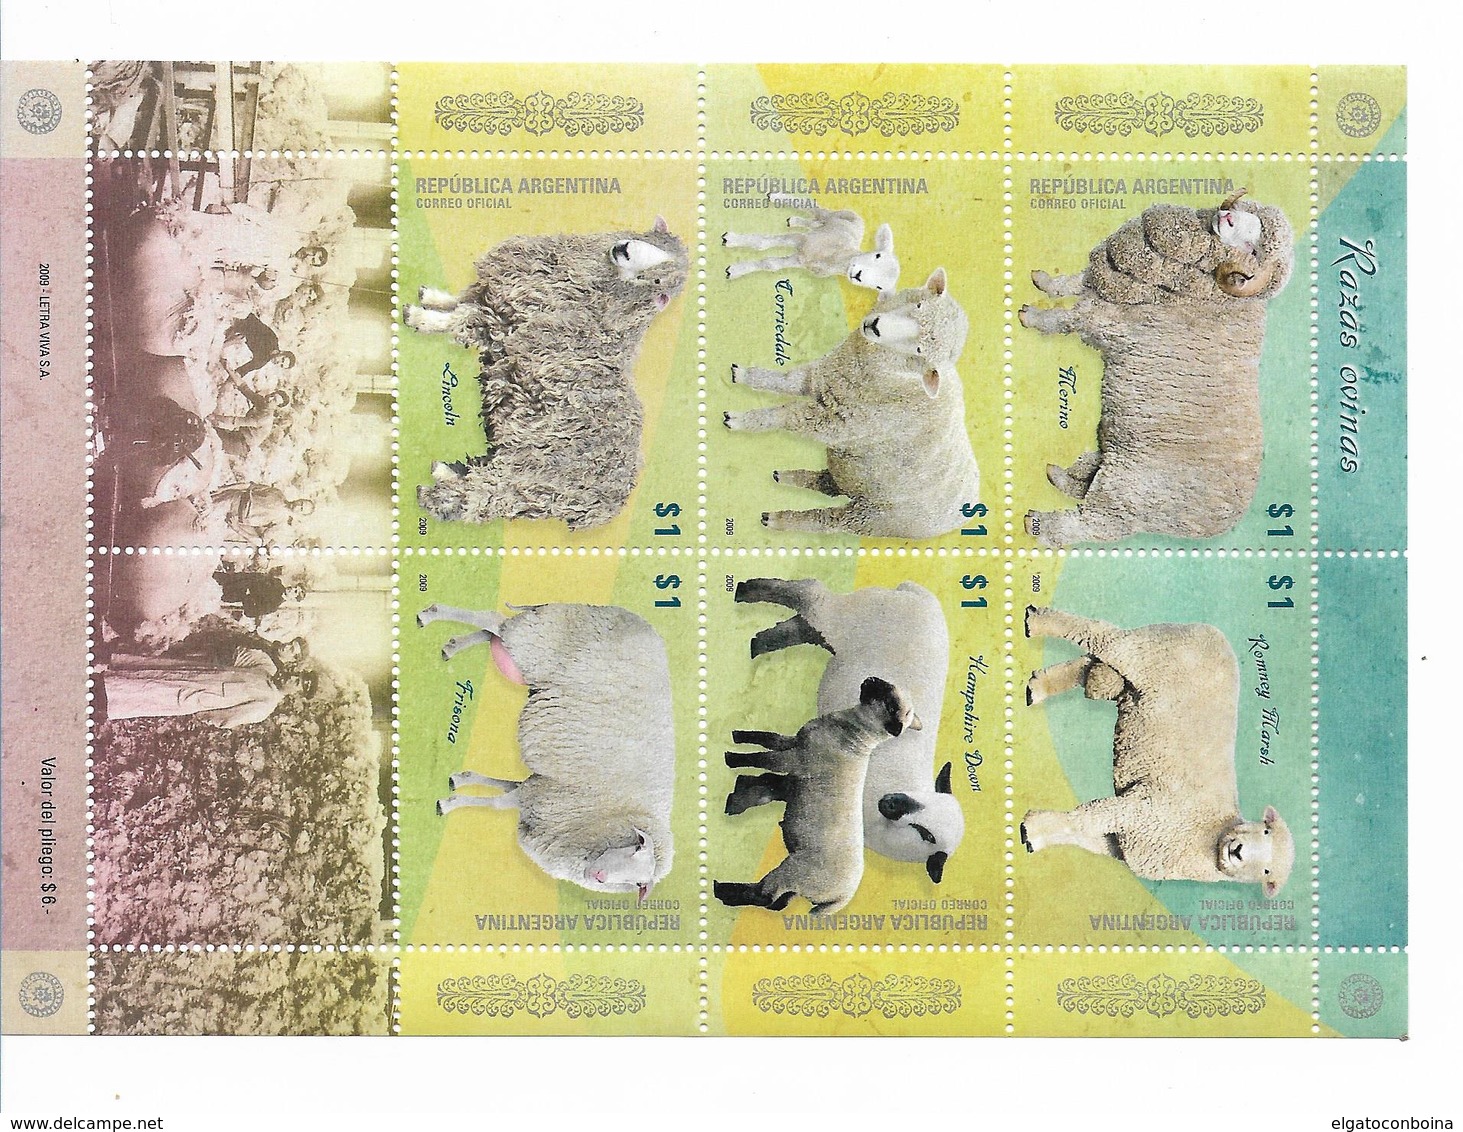 ARGENTINA 2009 SHEEPS MINI SHEET WITH 6 STAMPS MINT VERY FINE - Unused Stamps